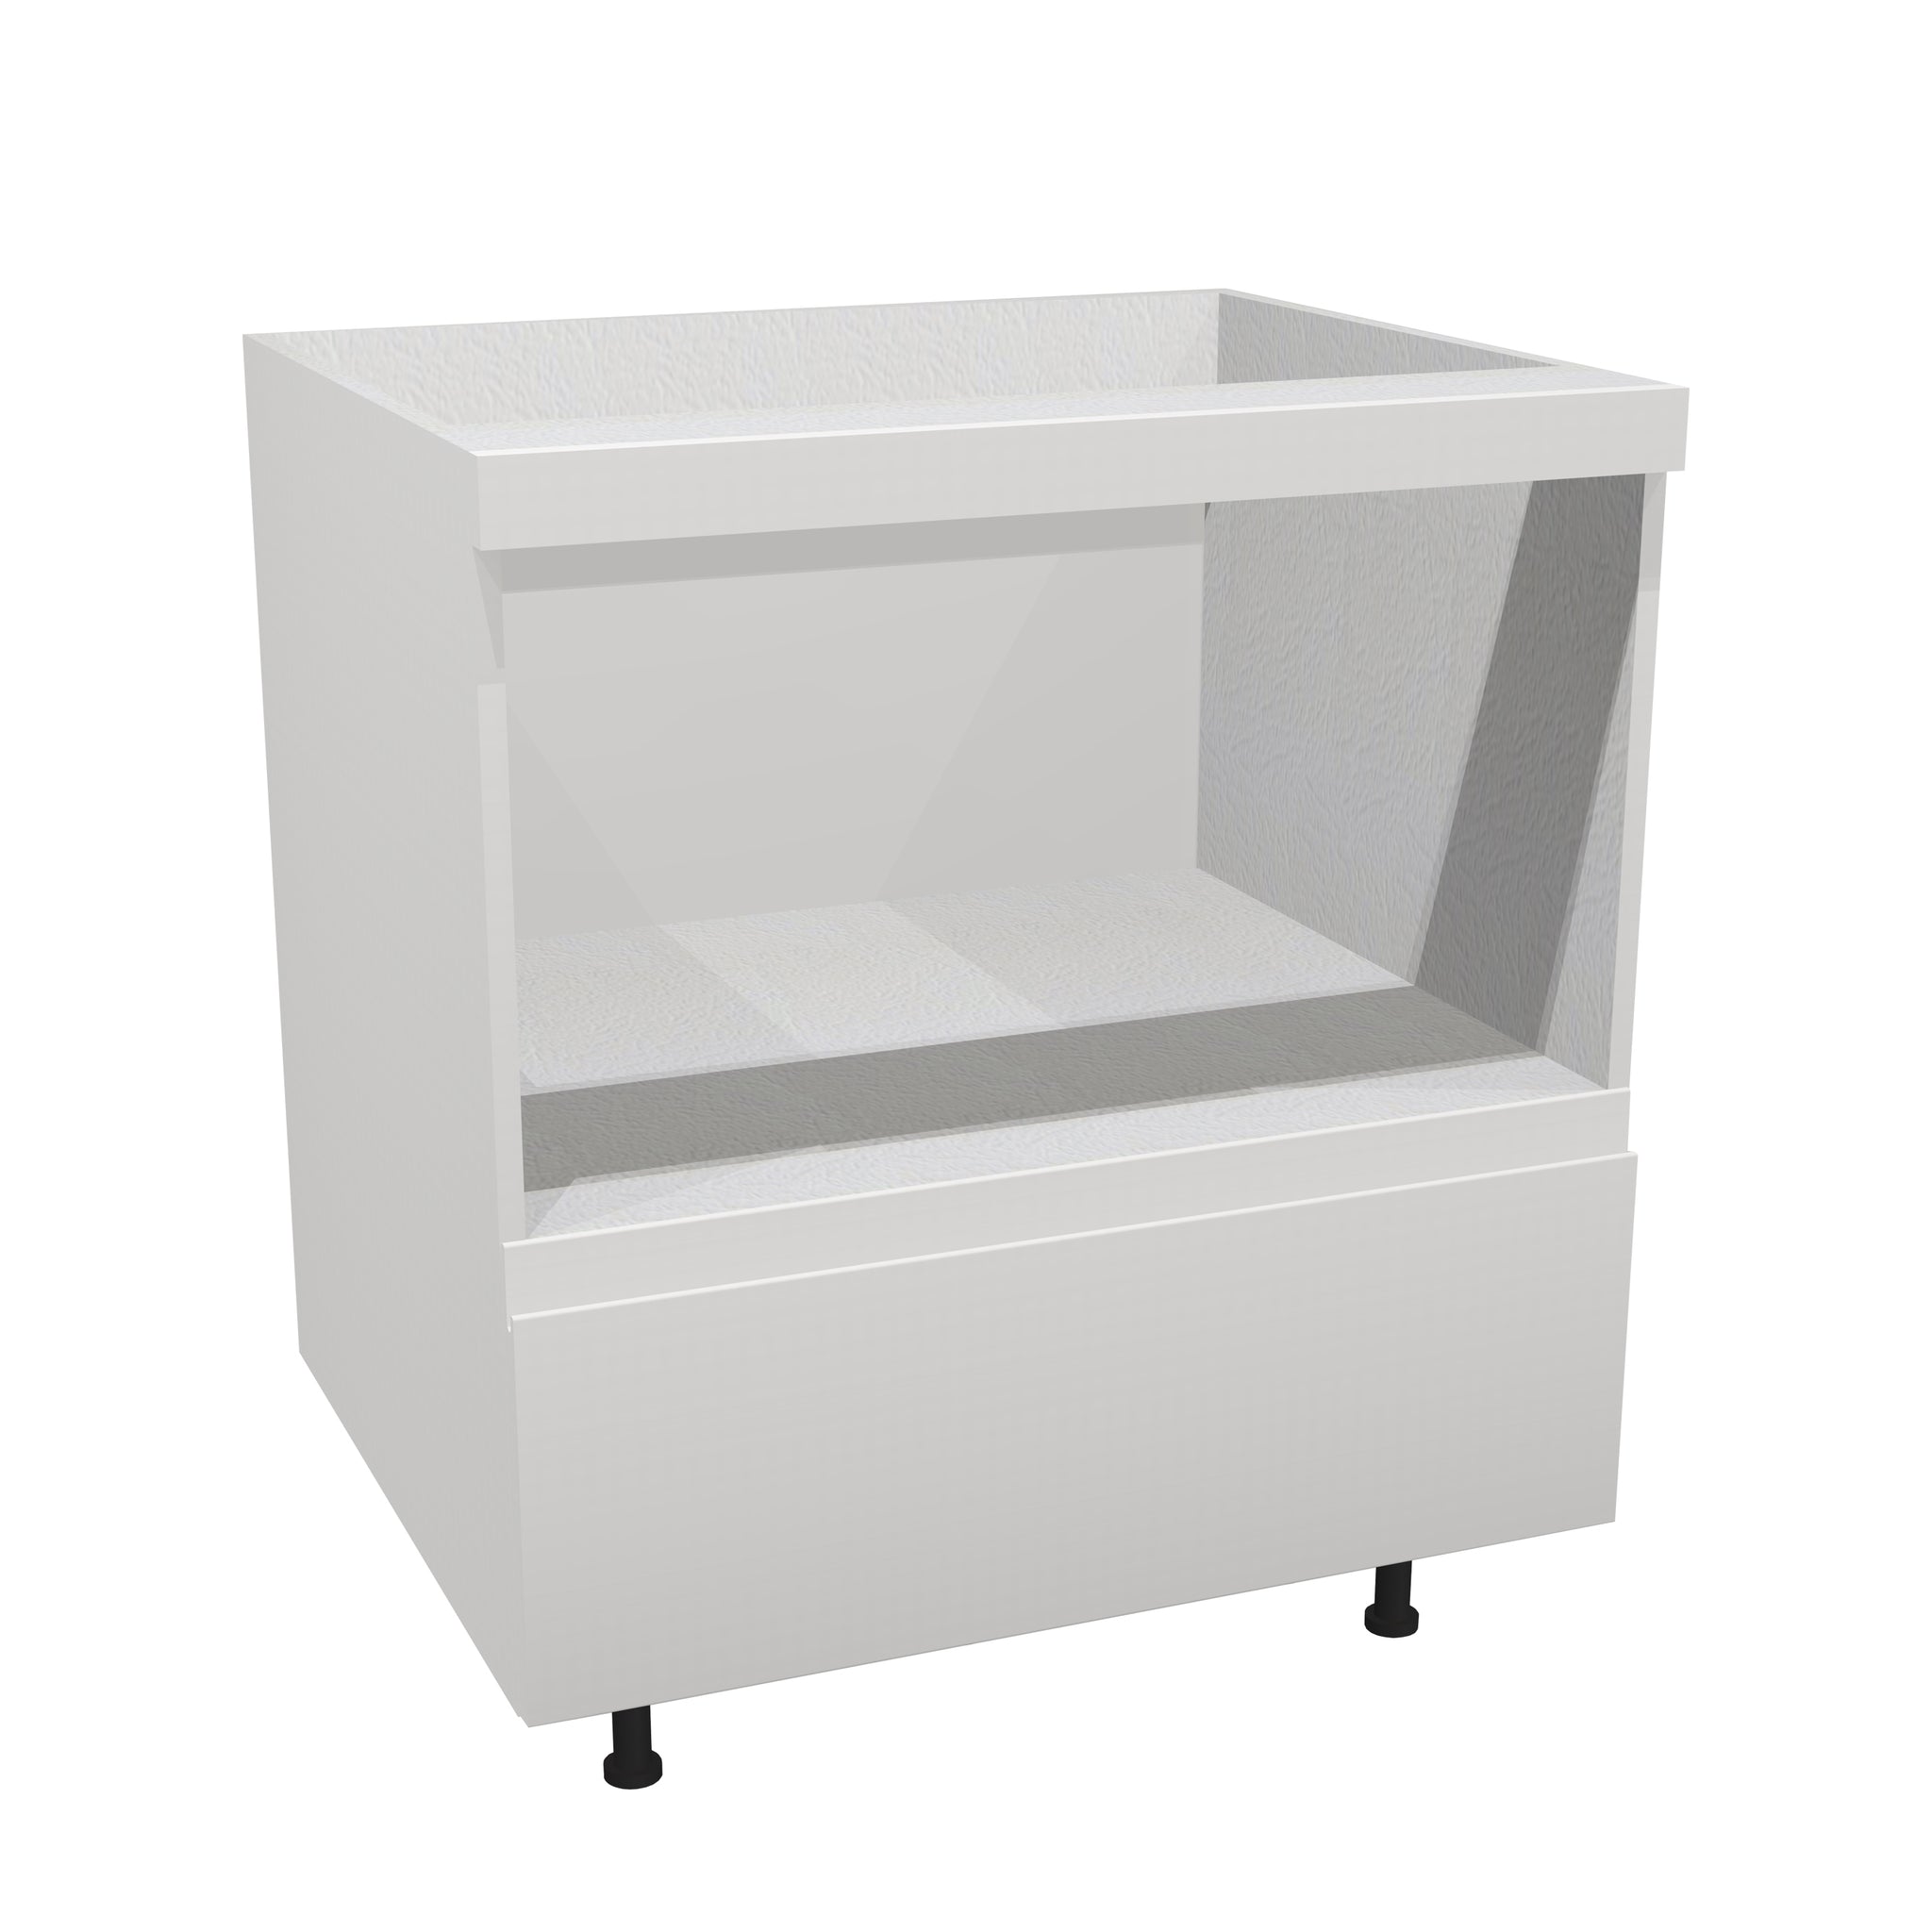 RTA - Lacquer White - Base Microwave Cabinet | 27"W x 30"H x 23.8"D